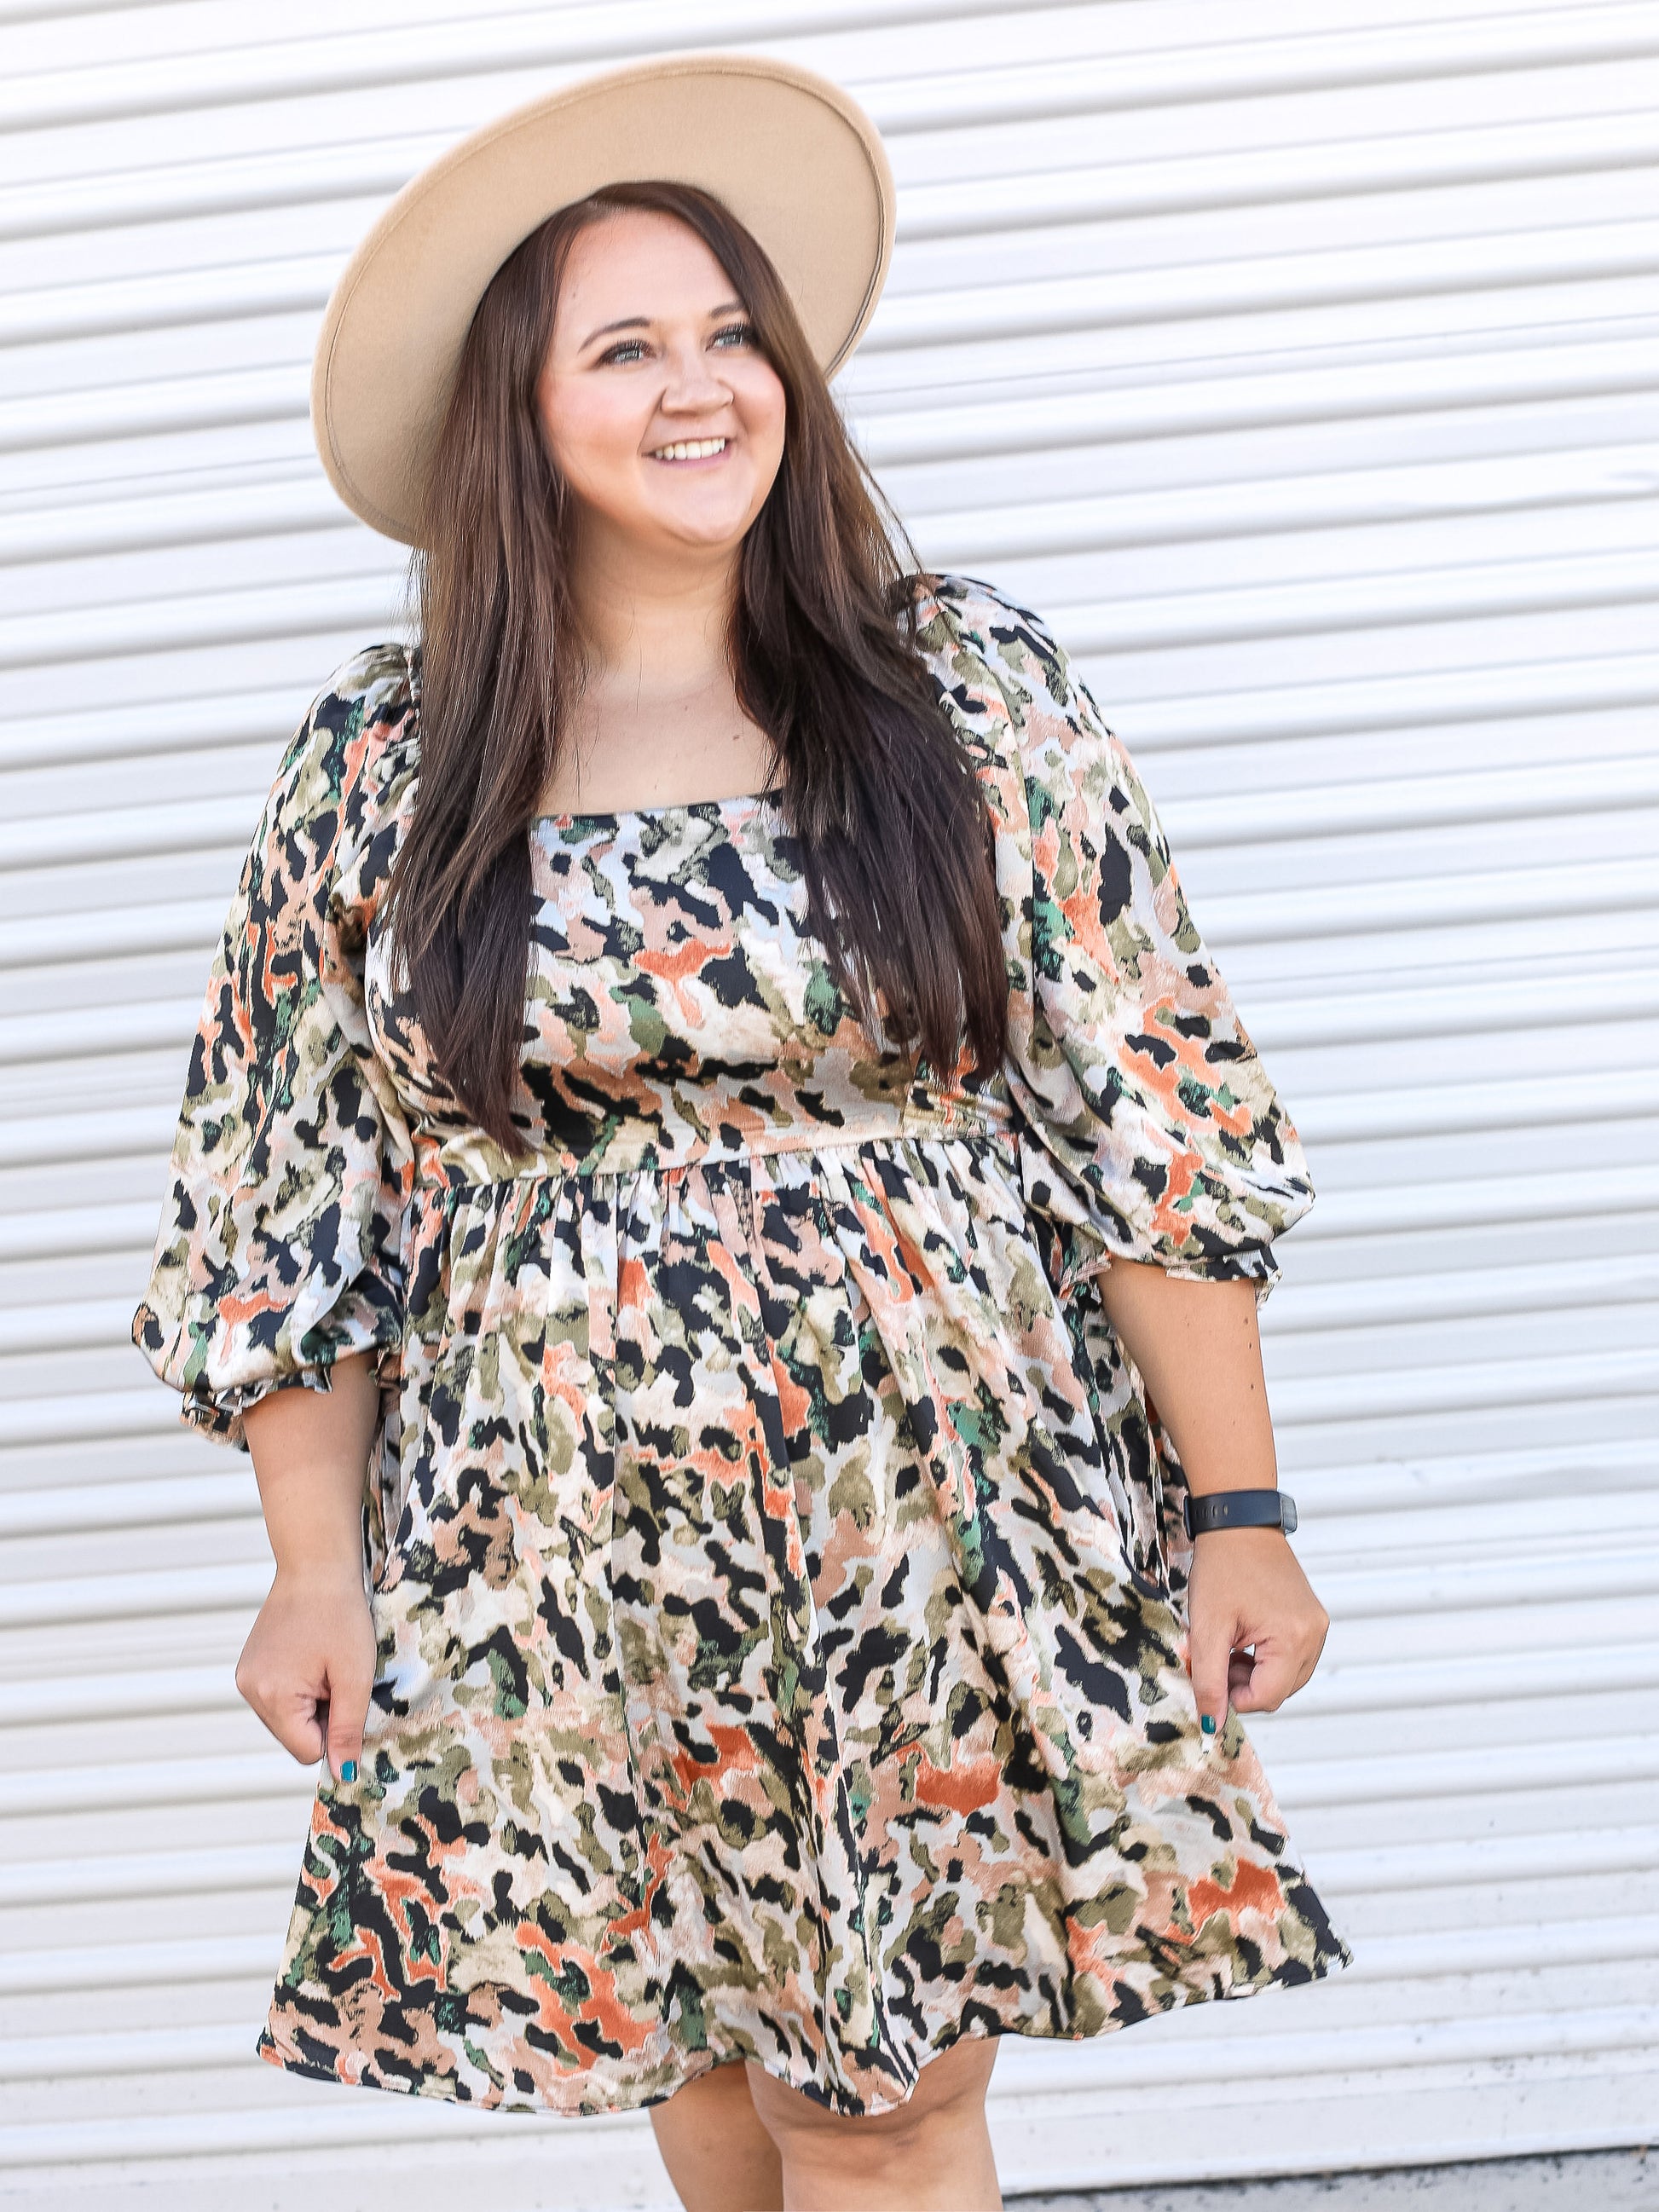 Leopard multicolored dress paired with a wide brimmed hat